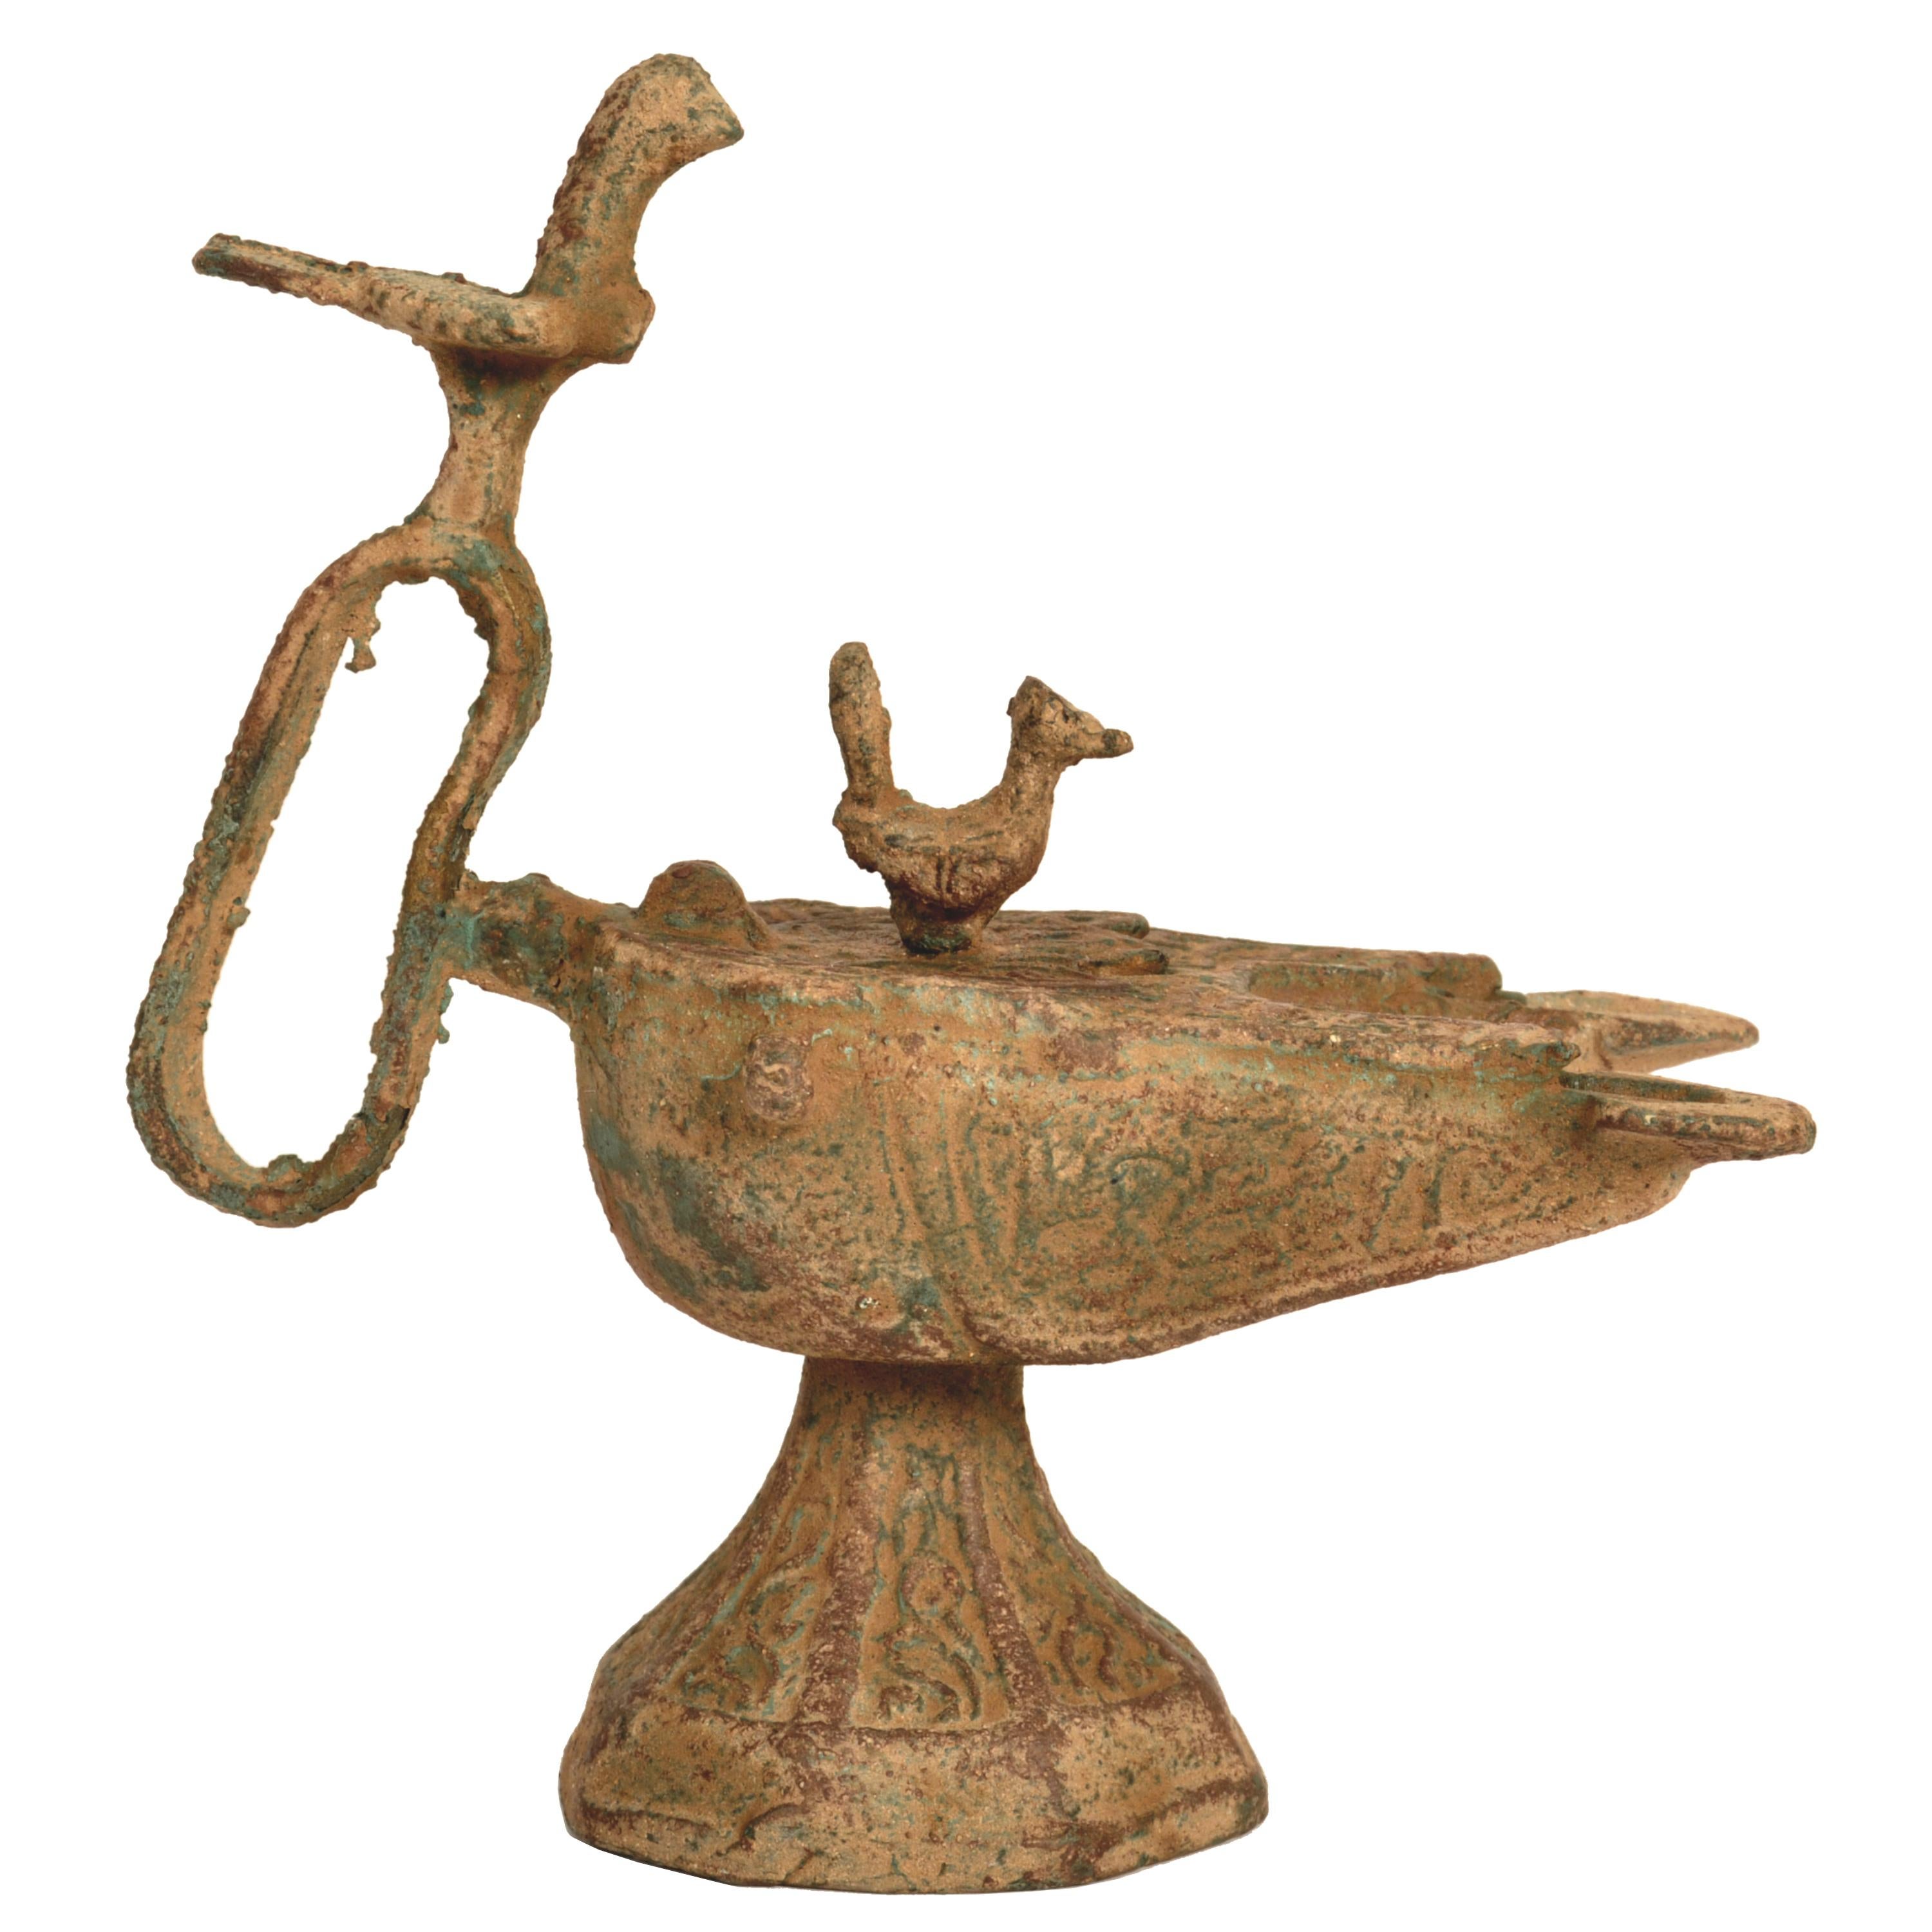 A 12th Century Islamic bronze oil lamp, Eastern Persia, Khurasan.
The cast bronze body of compressed globular form, raised on a trumpet shaped foot, the hinged cover with a sculpted bird finial and  there is a corresponding finial to the loop